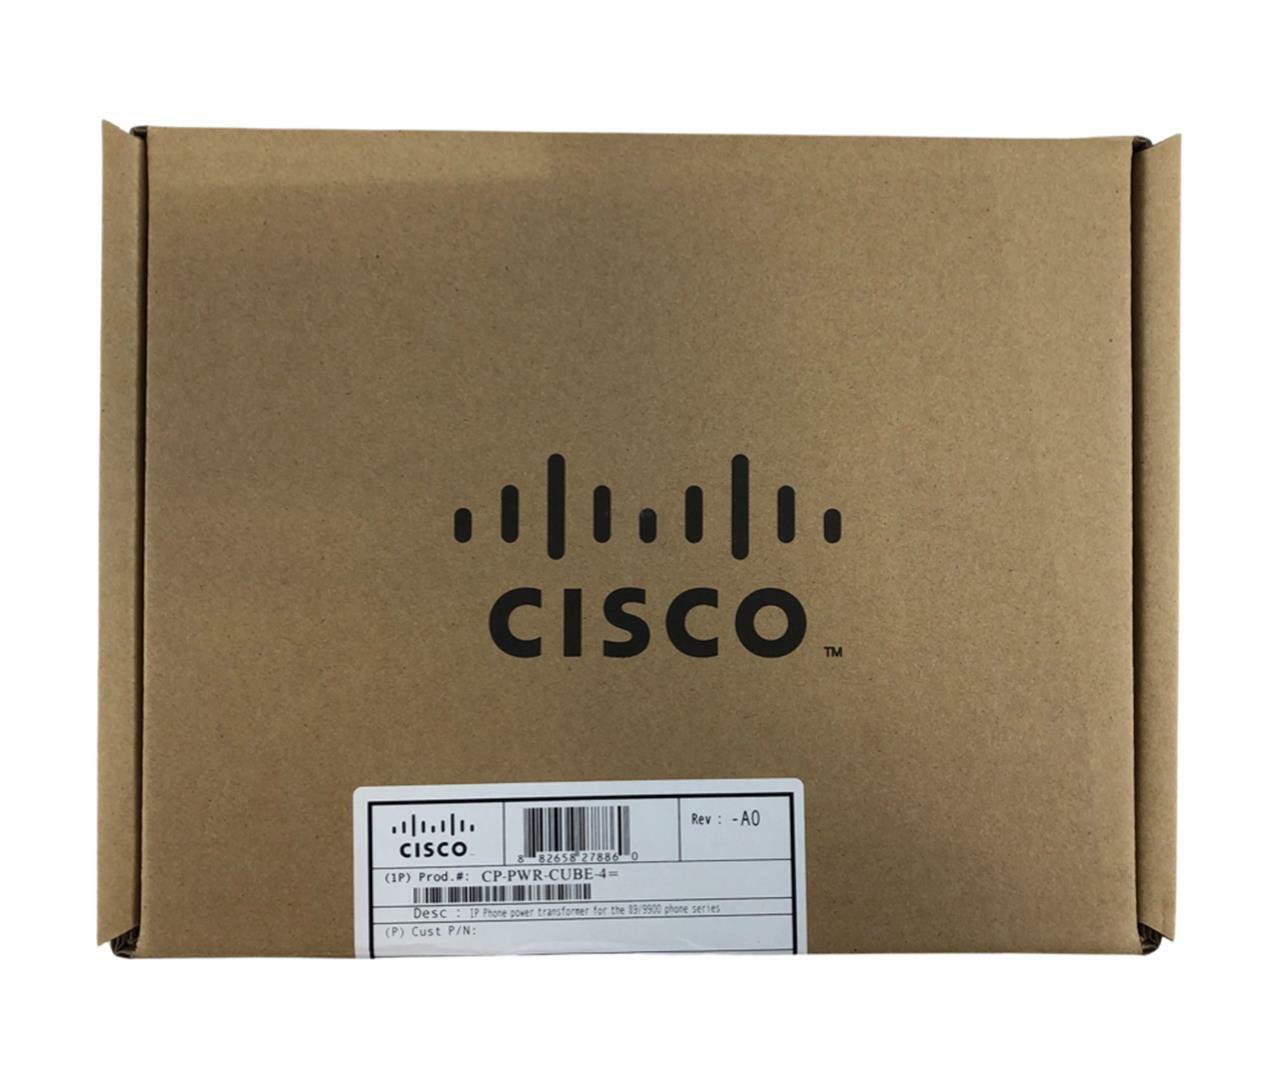 NEW - Open Box - Cisco CP-PWR-CUBE-4 Power Cube IP Phone Power Supply